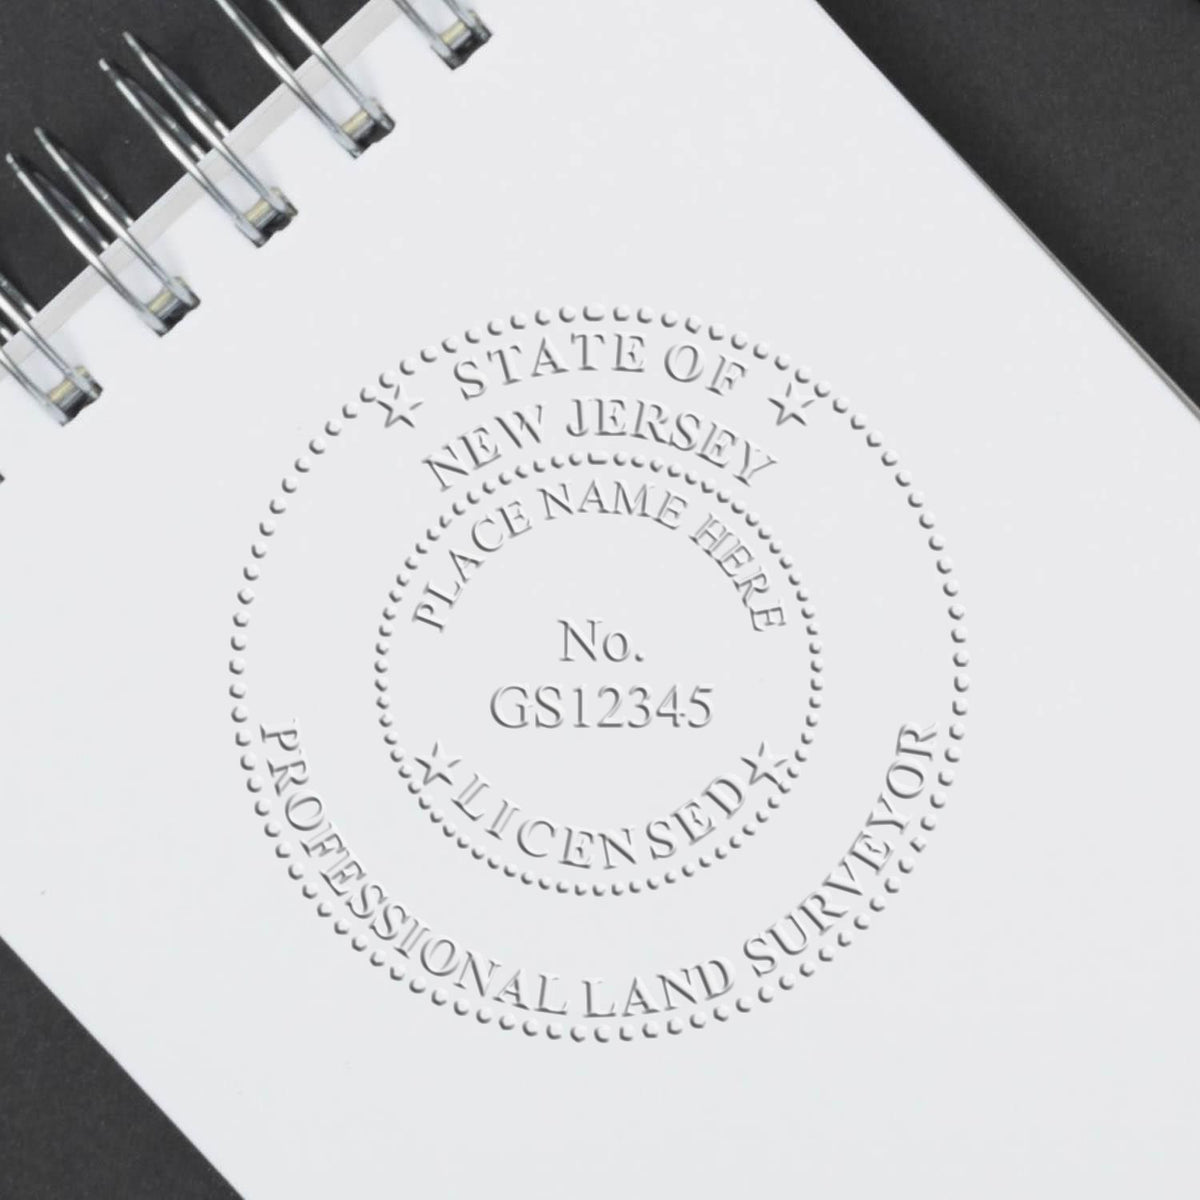 The Gift New Jersey Land Surveyor Seal stamp impression comes to life with a crisp, detailed image stamped on paper - showcasing true professional quality.